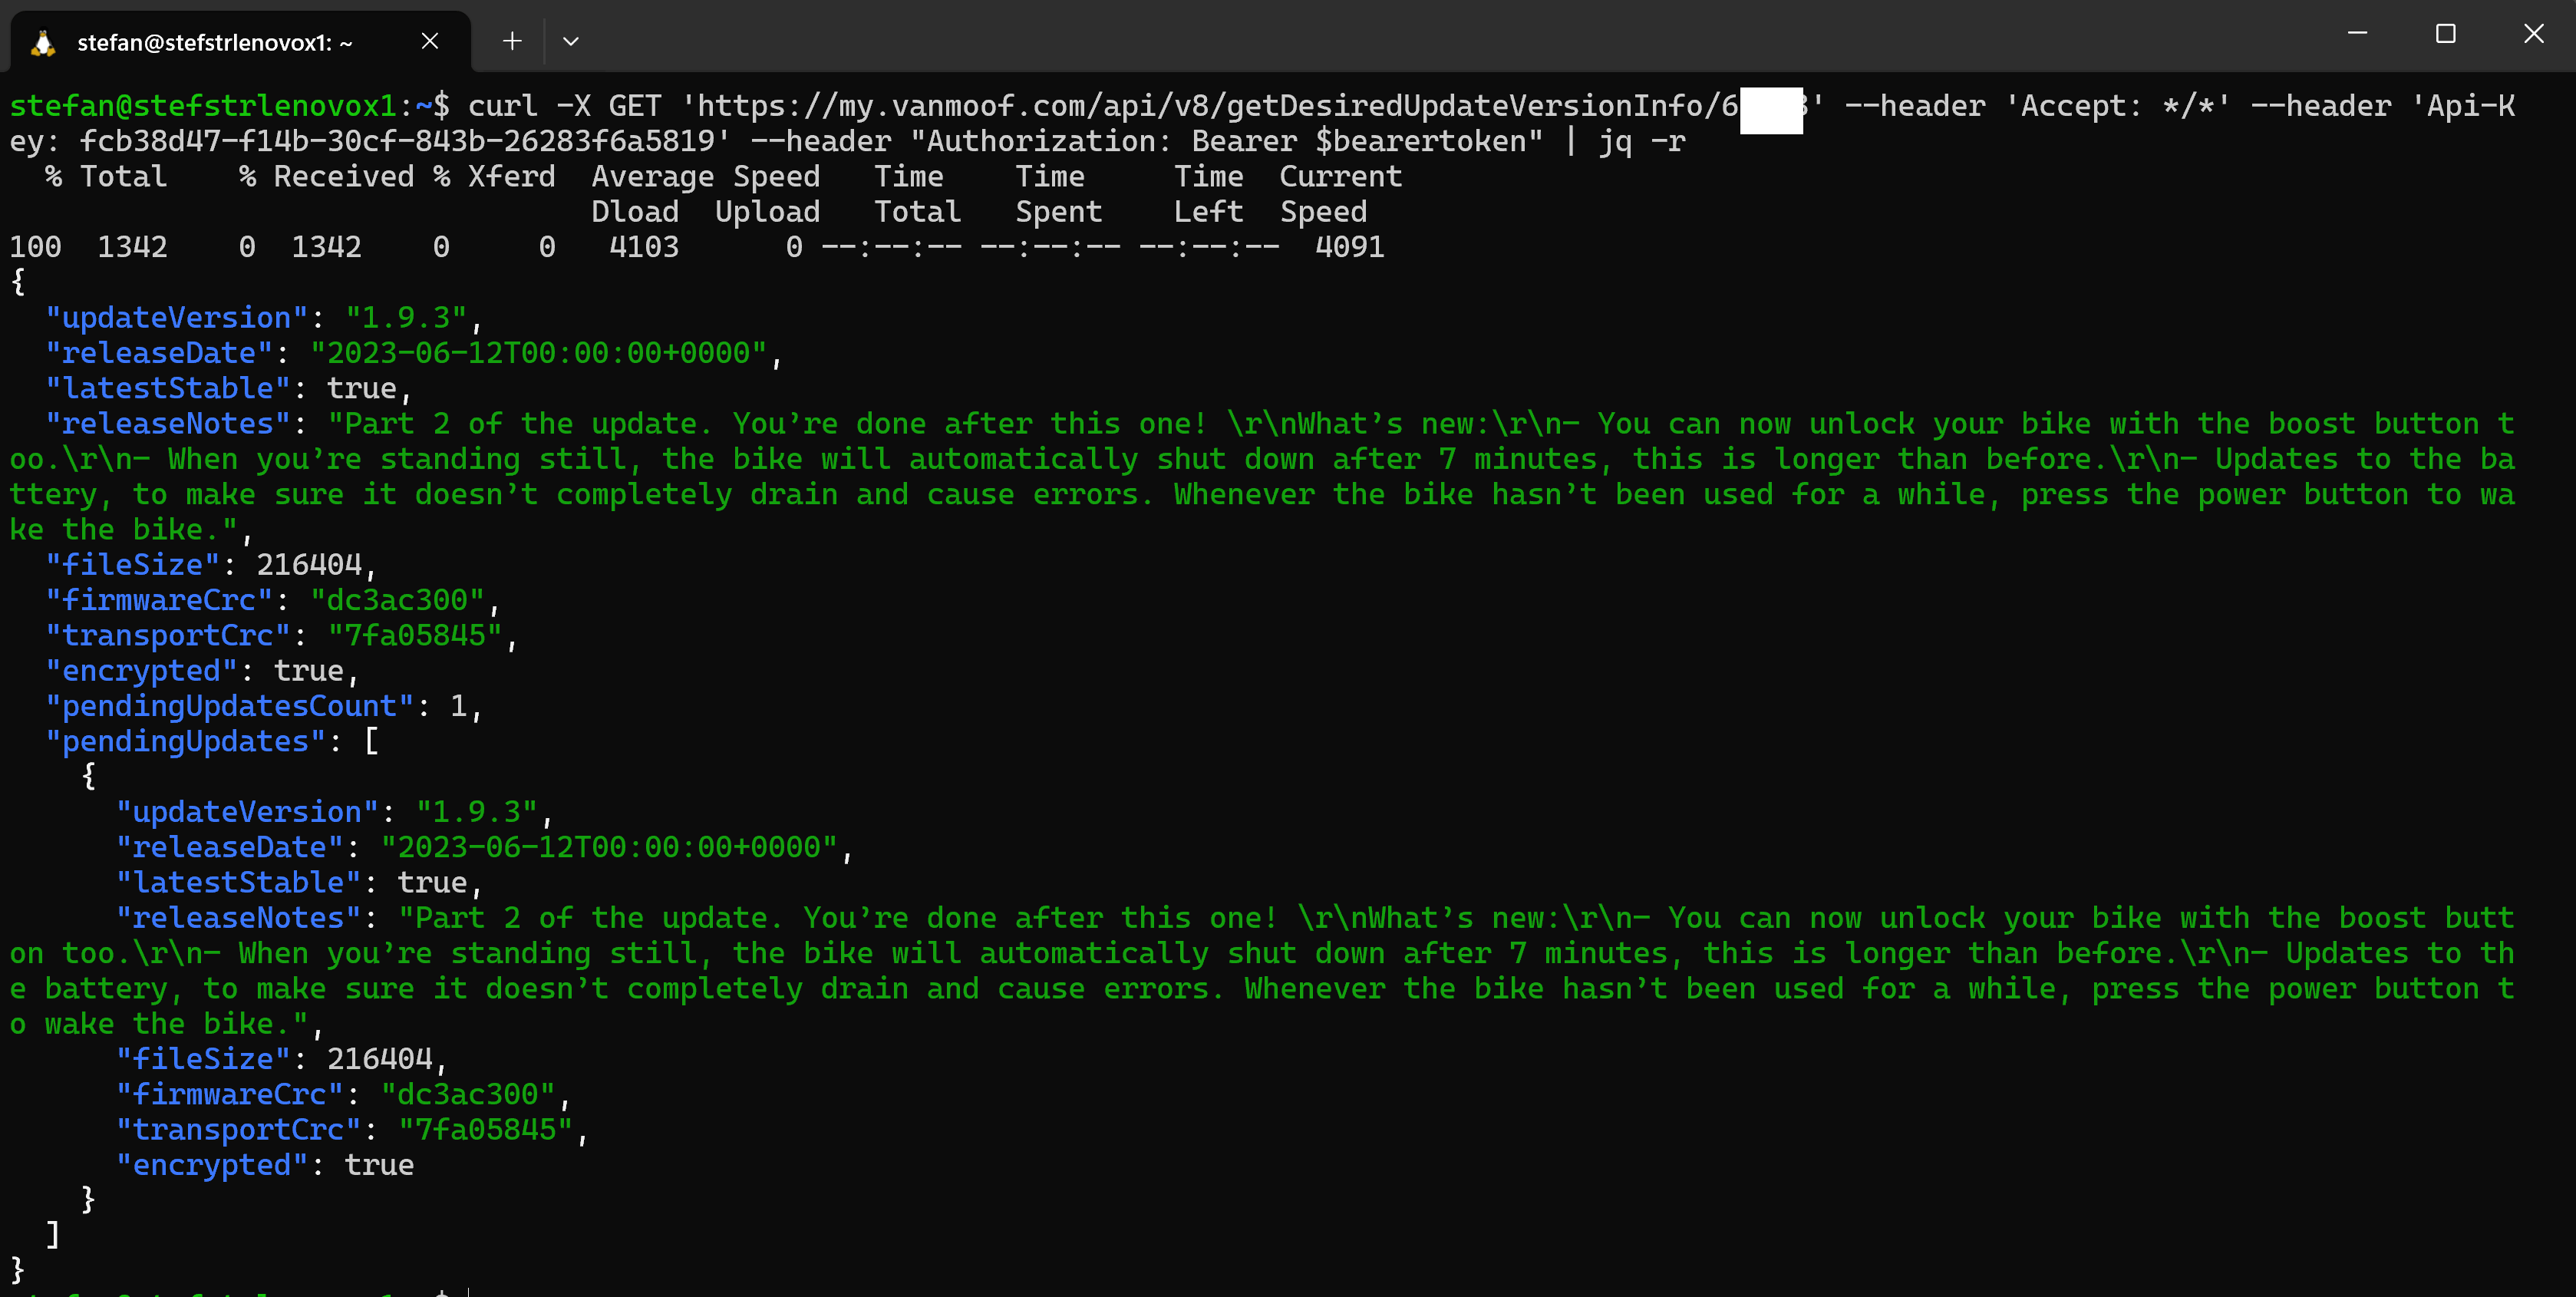 Screenshot of terminal with curl command to retrieve desired update version info from the vanMoof REST API